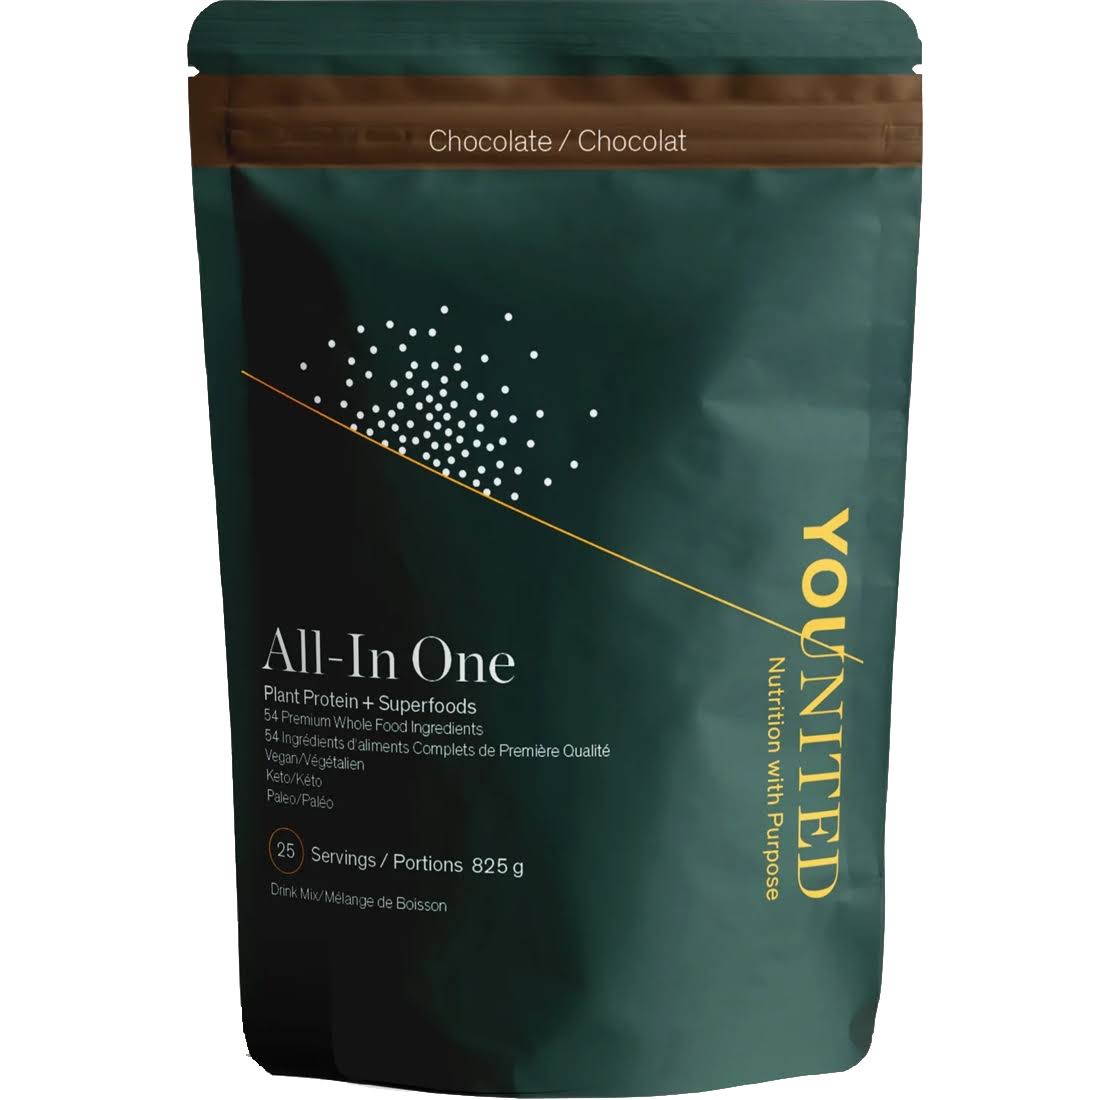 Younited | All-In One Plant Protein + Superfoods, Chocolate